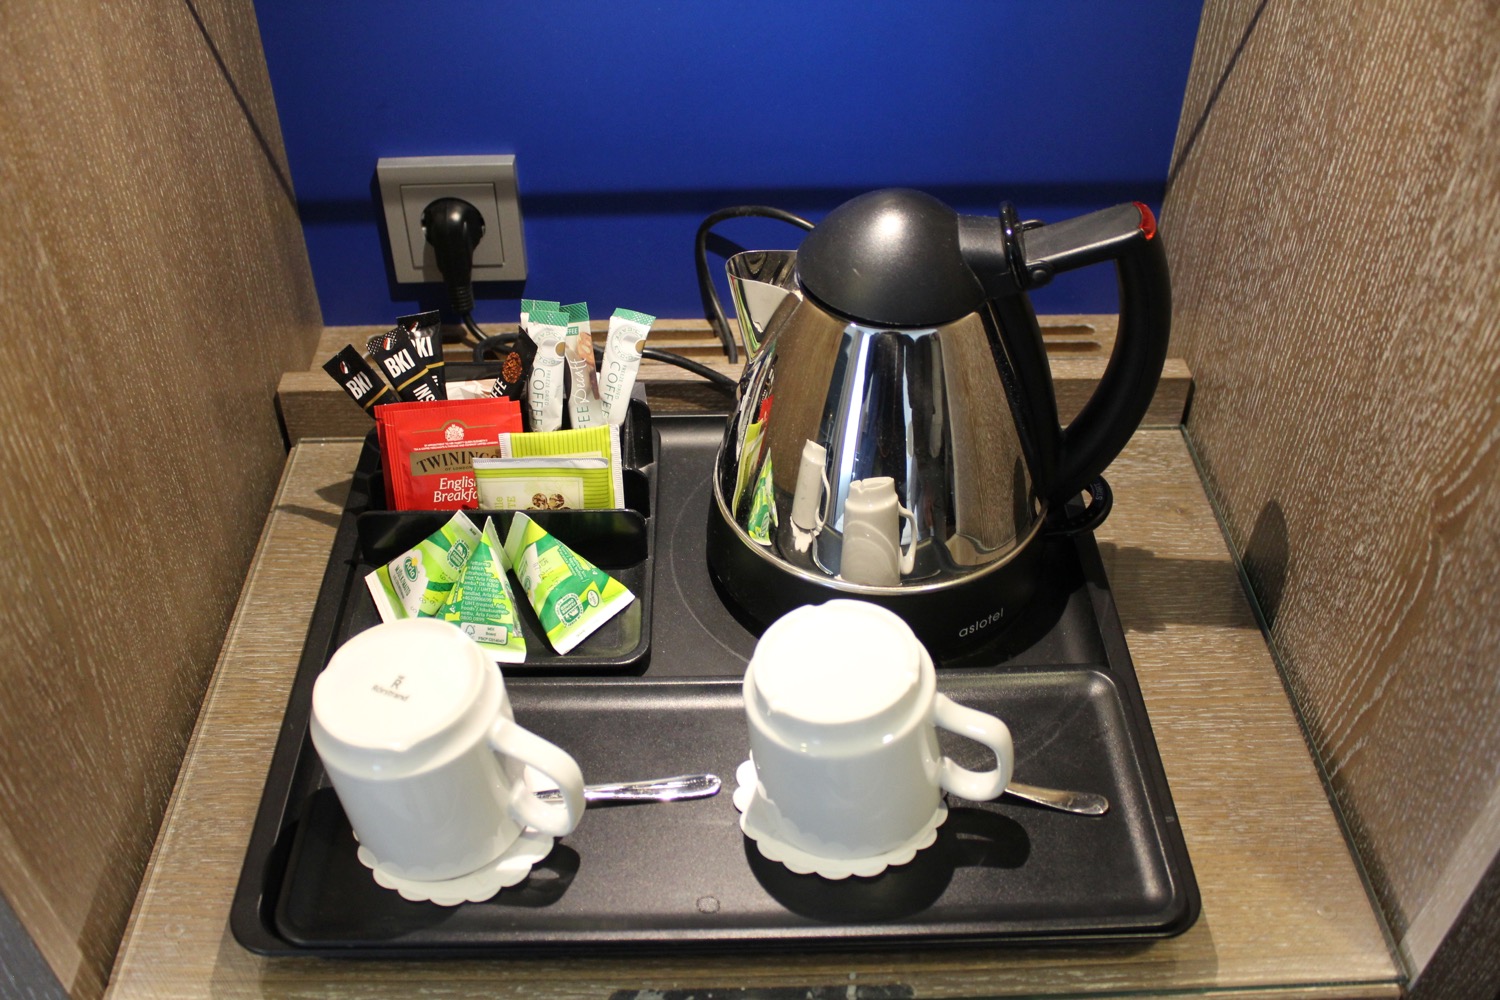 a tray with teapot and cups on it